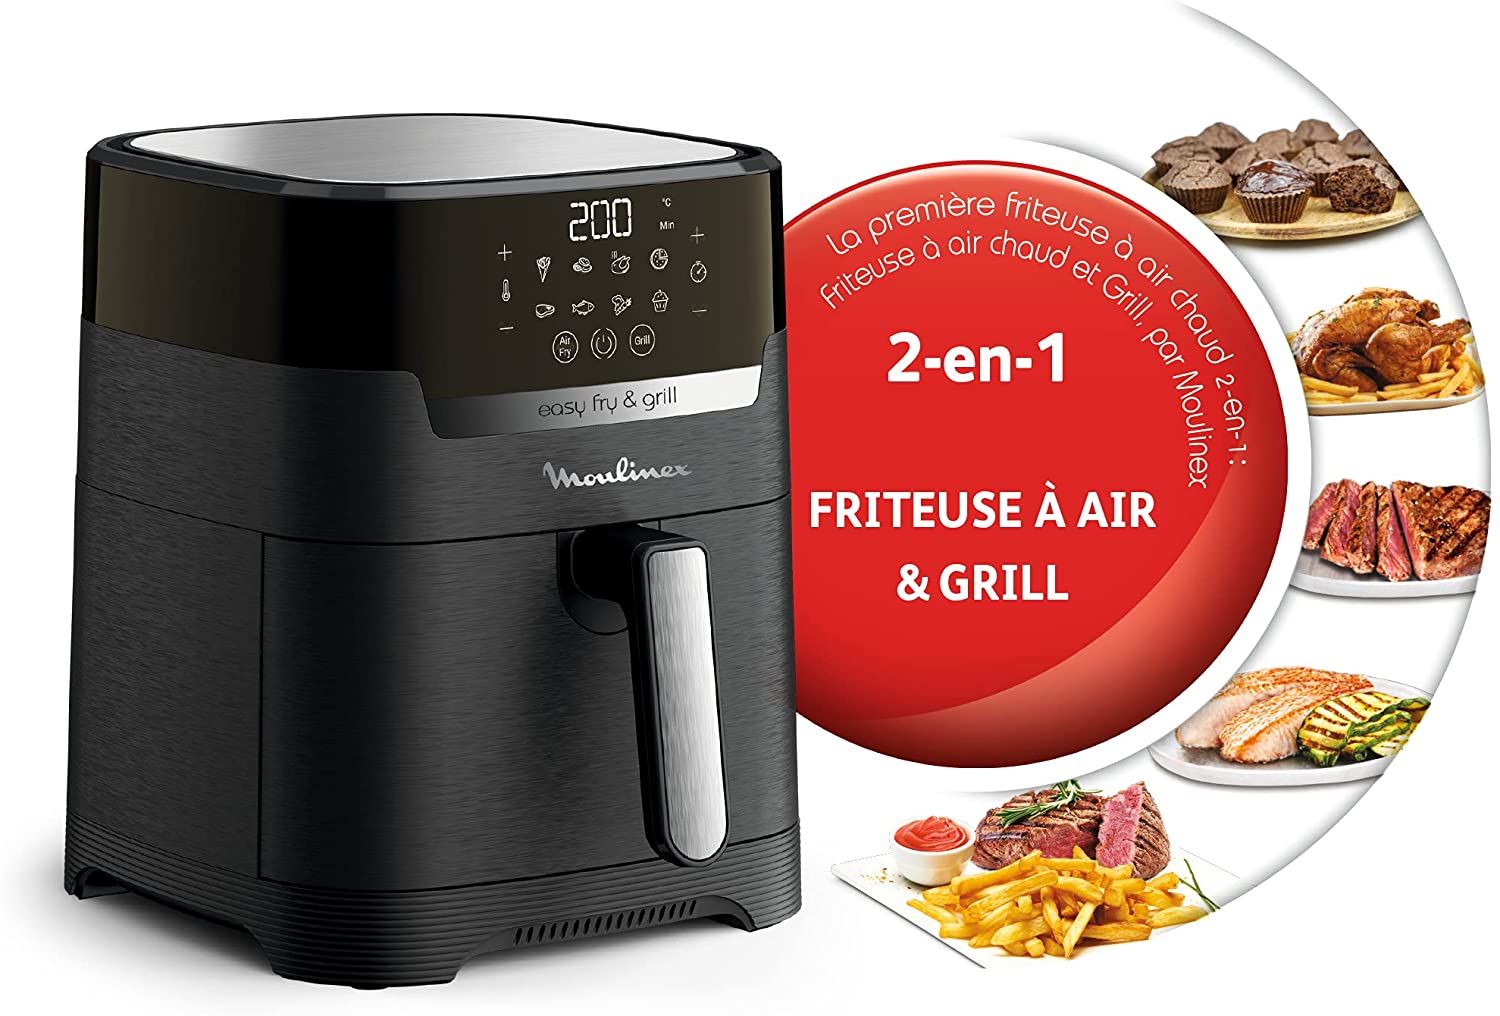 Moulinex Easy Fry & Grill Digital 2-en-1, Friteuse à air + grill